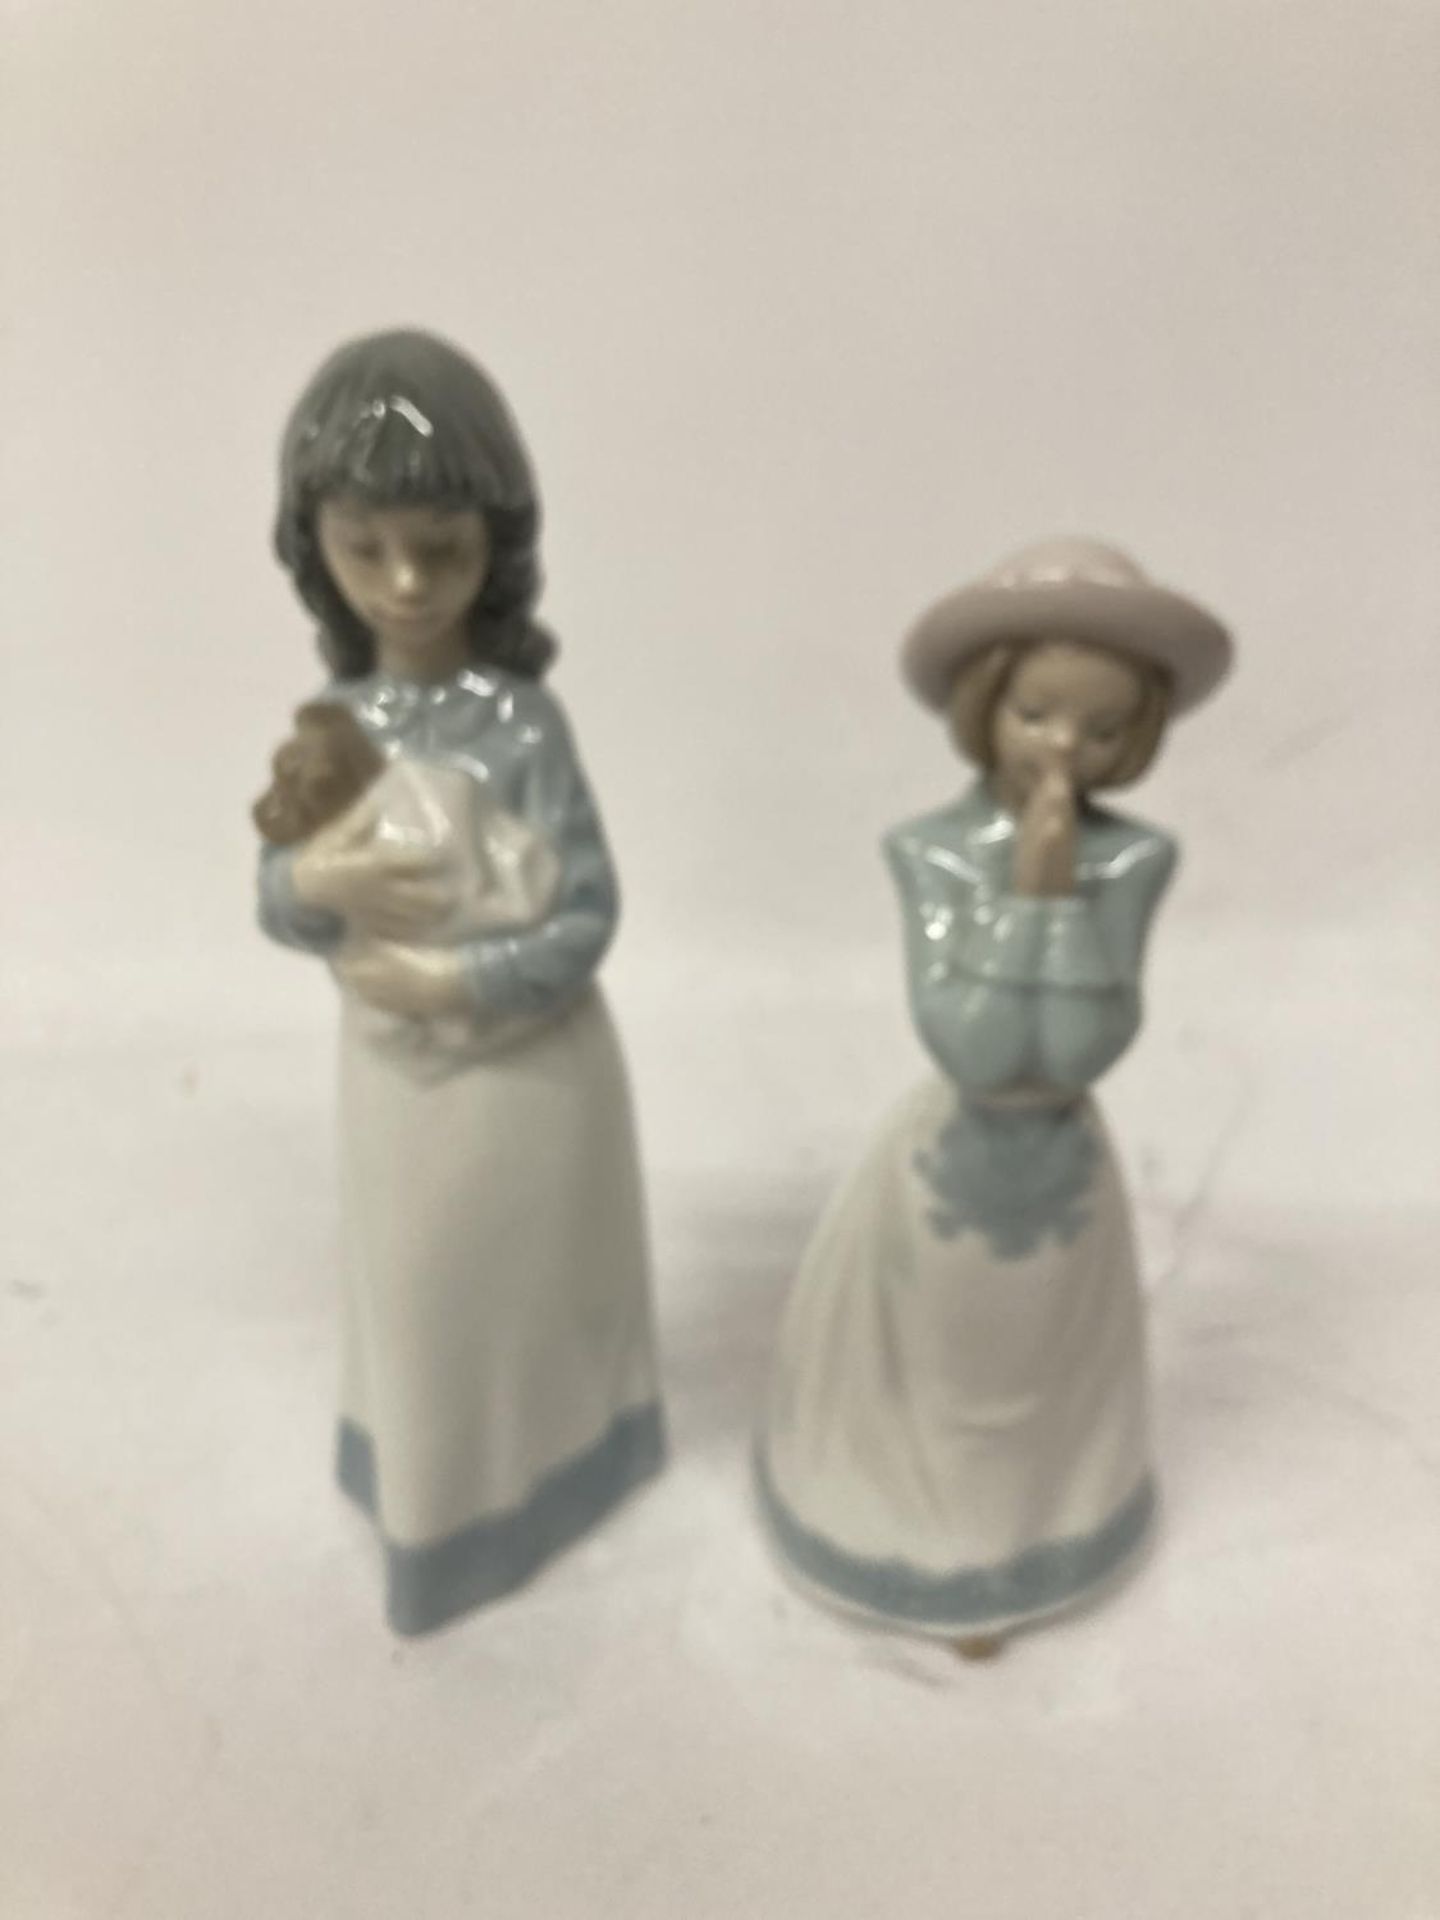 TWO GIRL NAO FIGURINES ONE PRAYING AND ONE HOLDING ADOG